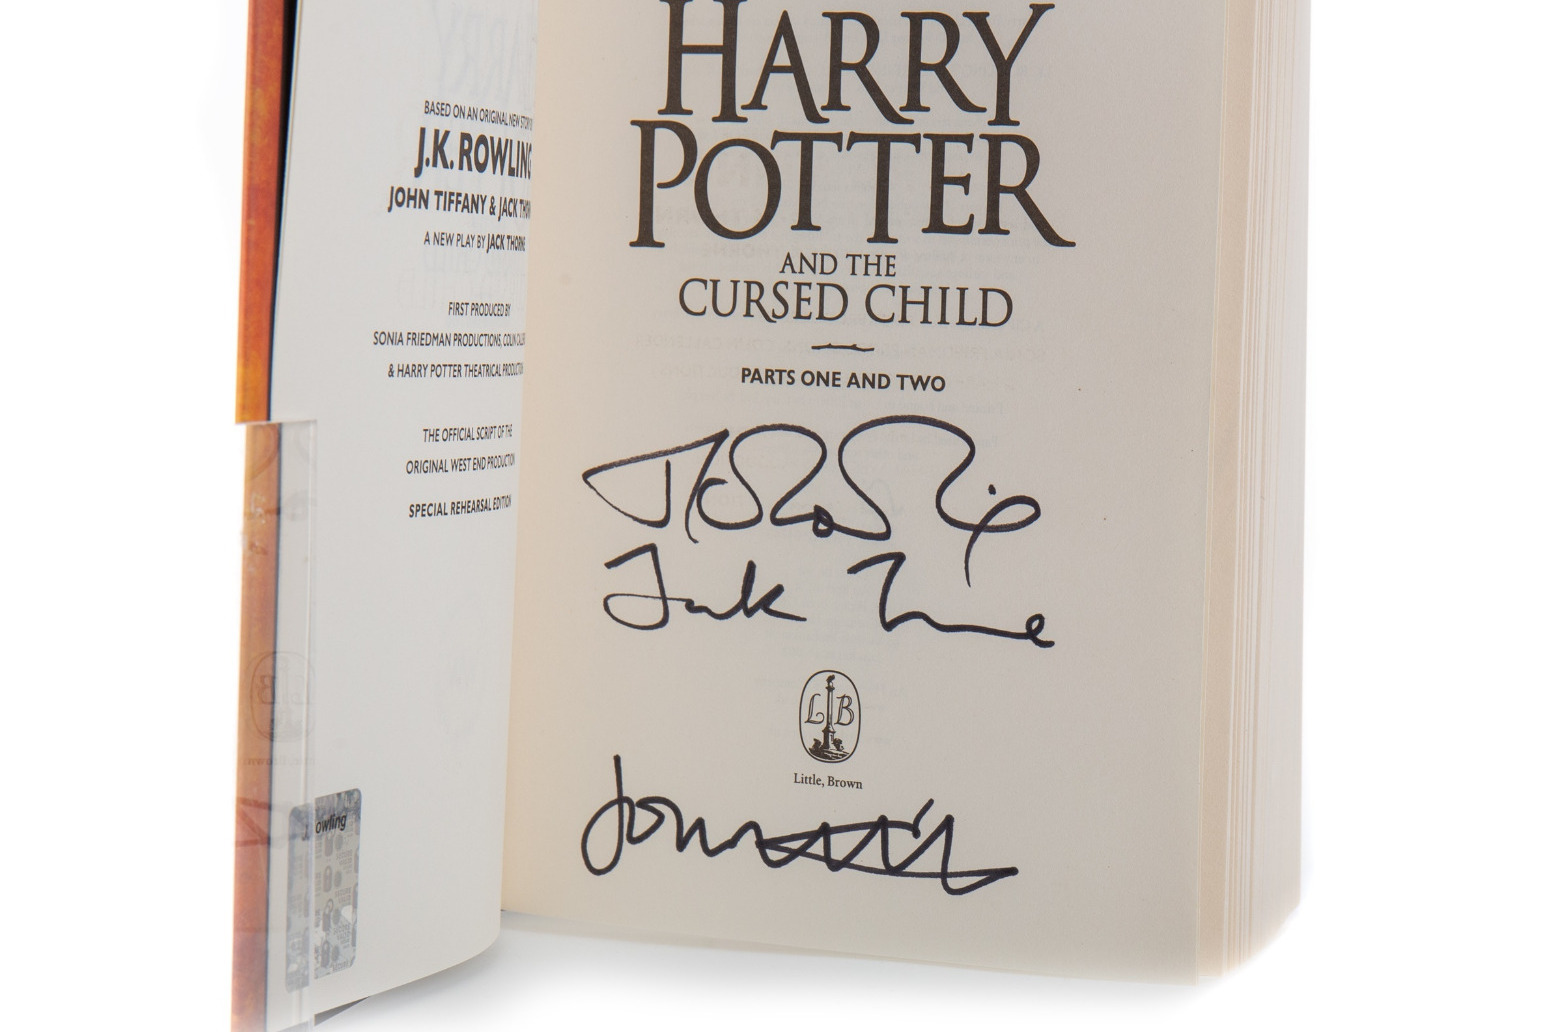 Copy of Harry Potter play signed by JK Rowling sells at auction 